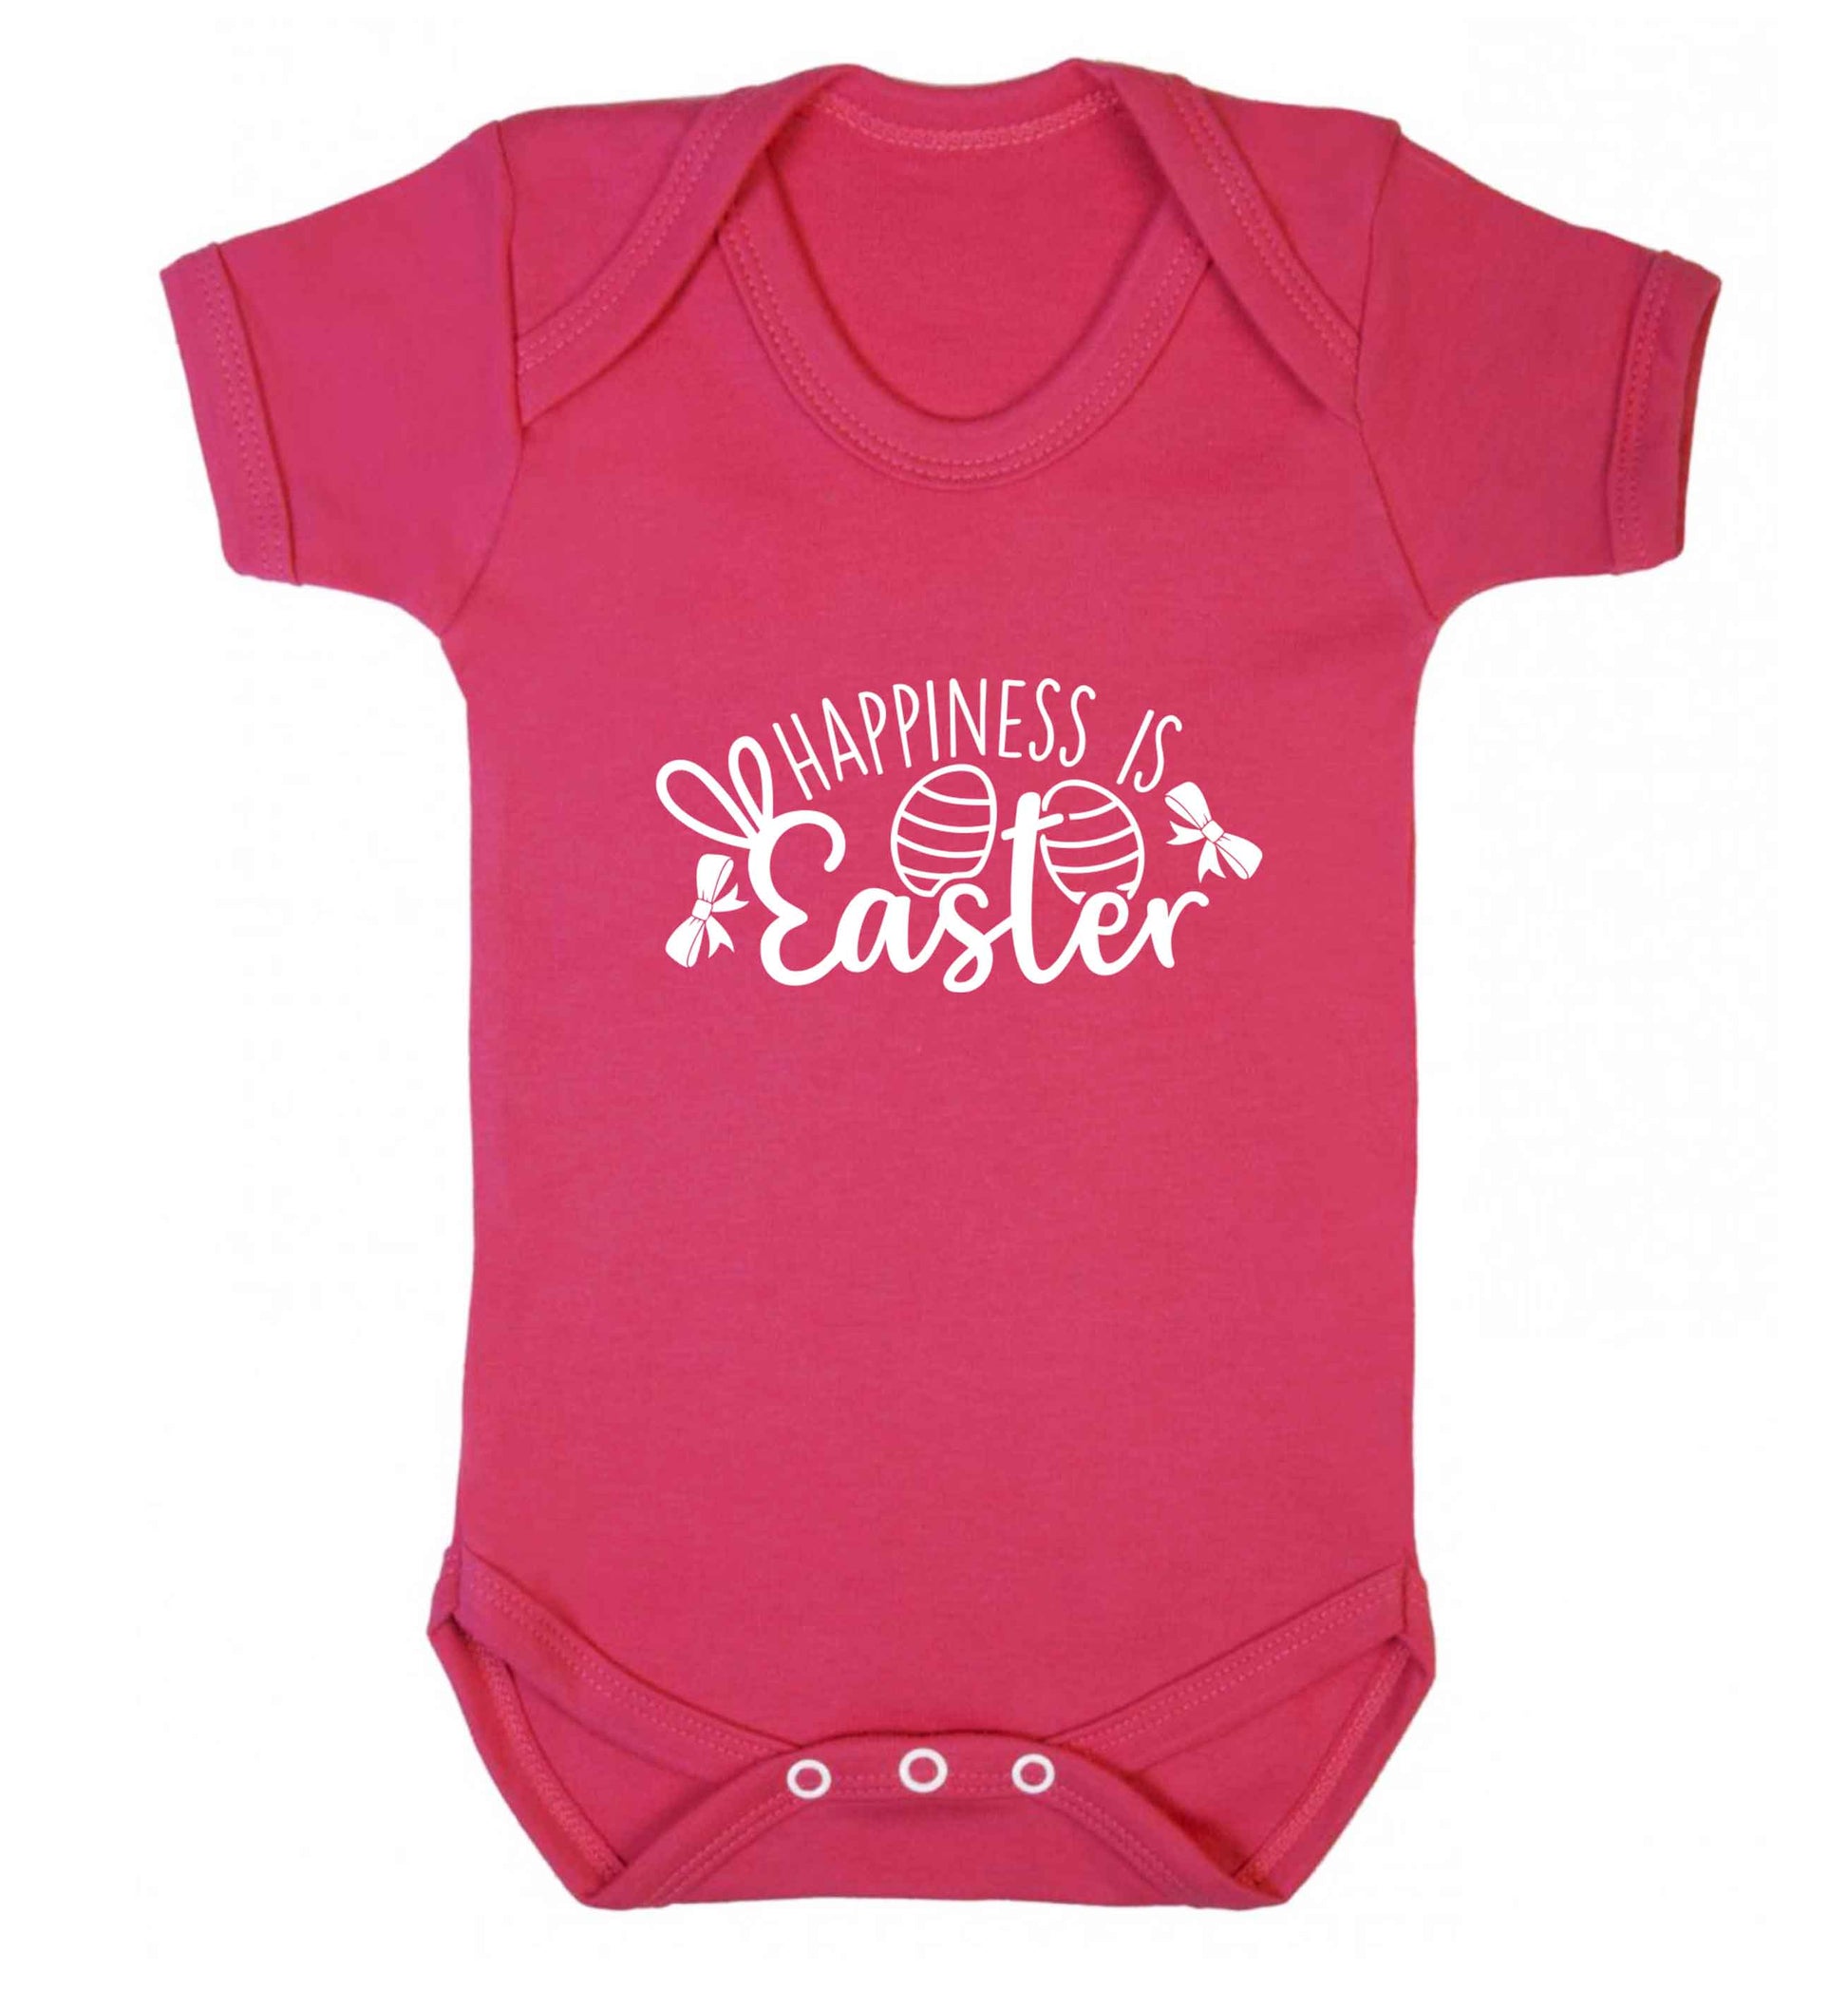 Happiness is easter baby vest dark pink 18-24 months